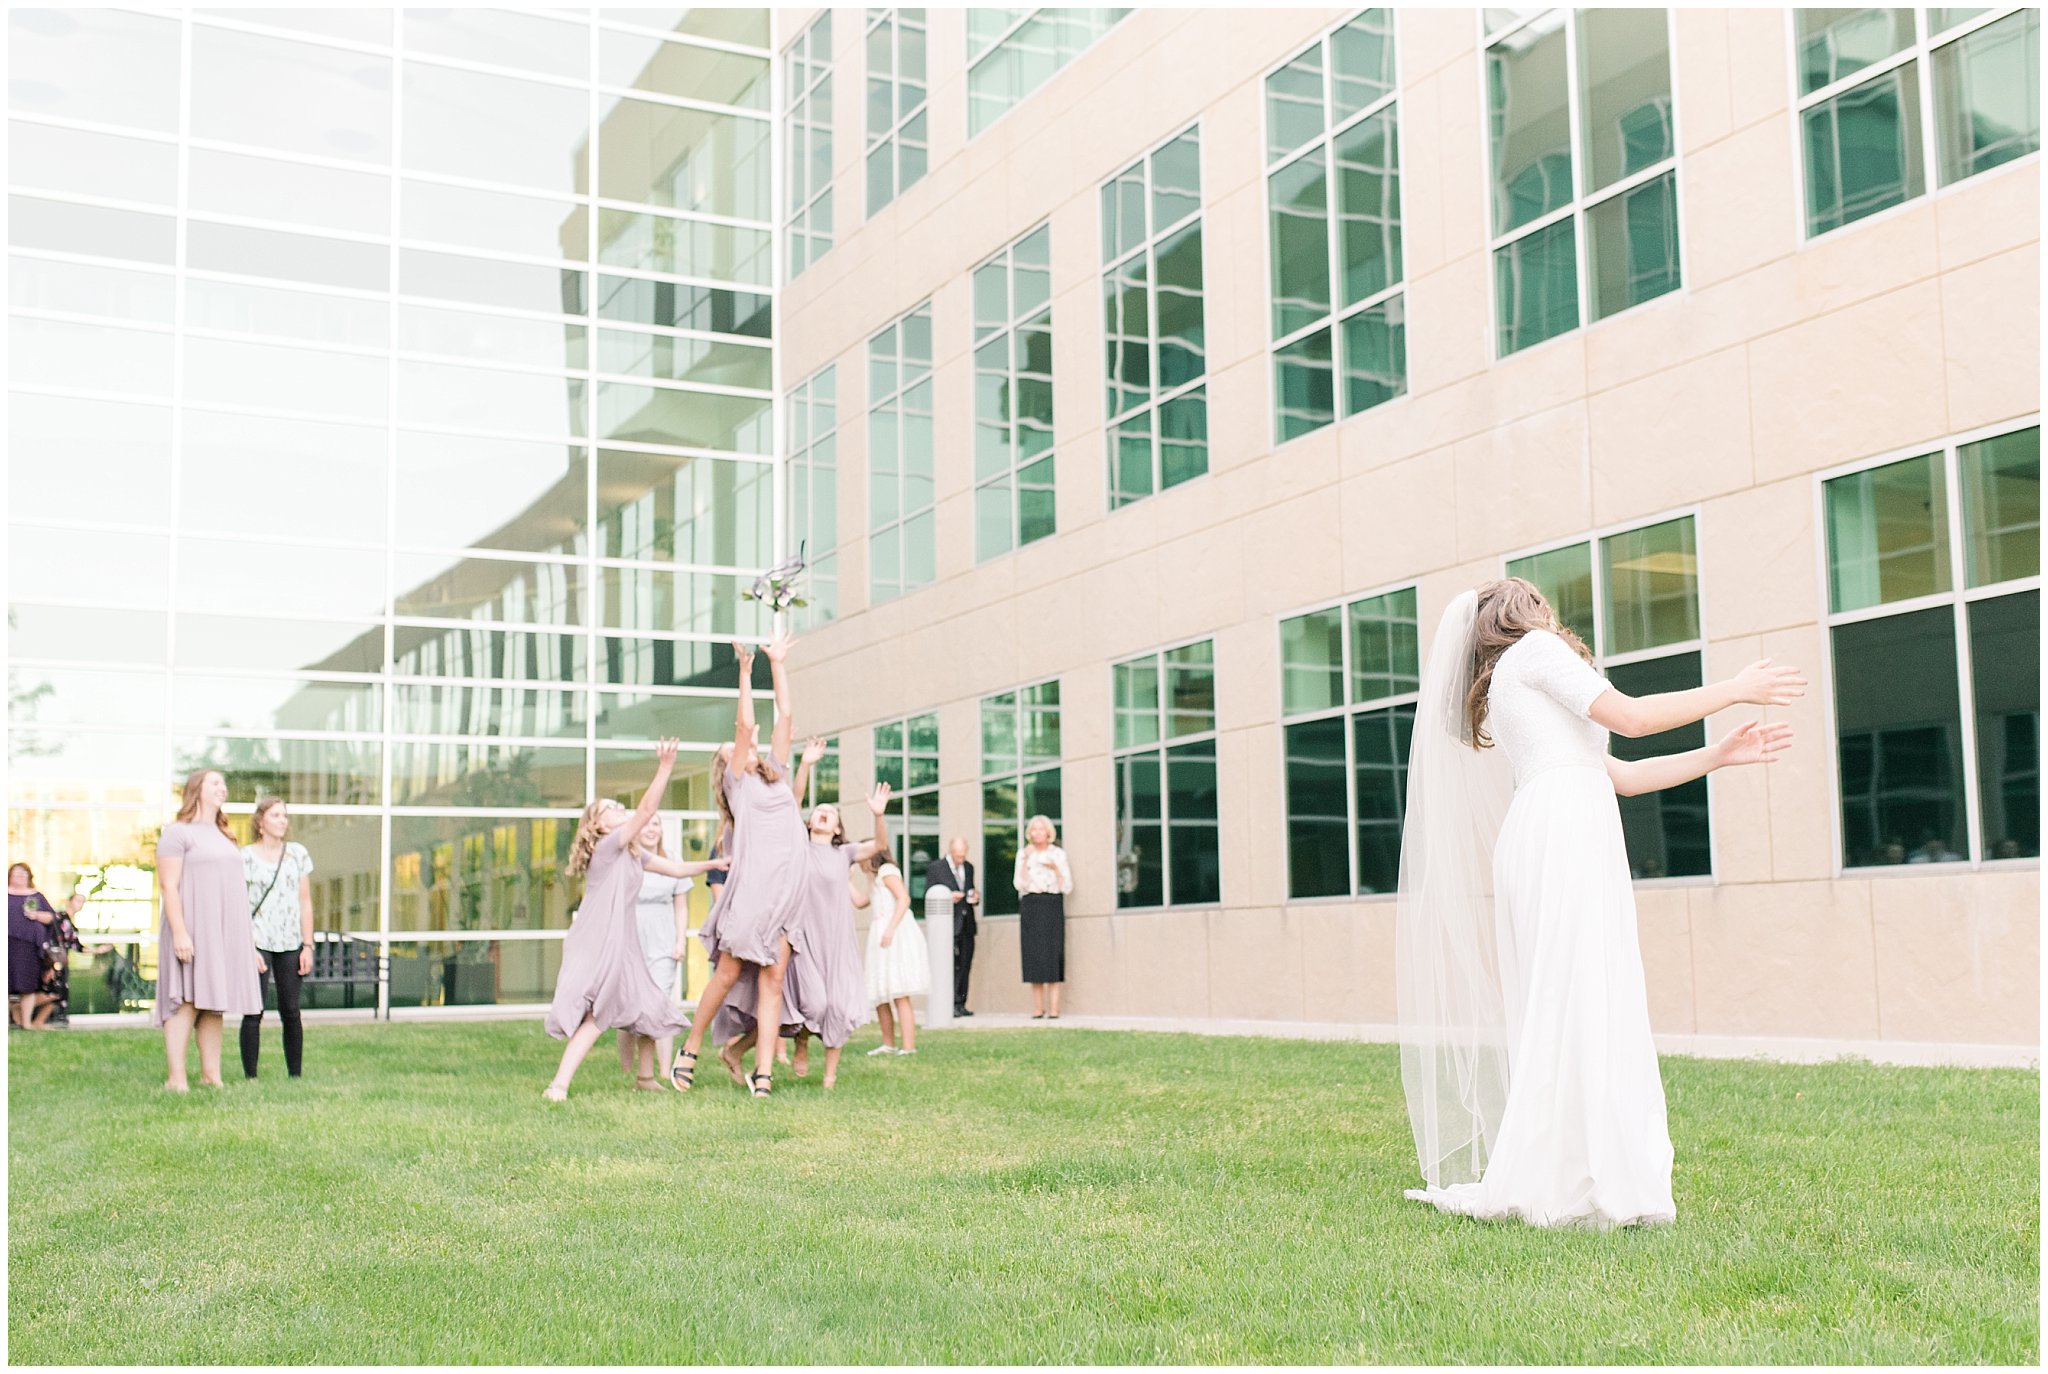 Bouquet toss with a lot of bridesmaids outdoors | Salt Lake Temple Wedding and Clearfield City Hall Reception | Utah Wedding Photographers | Jessie and Dallin Photography